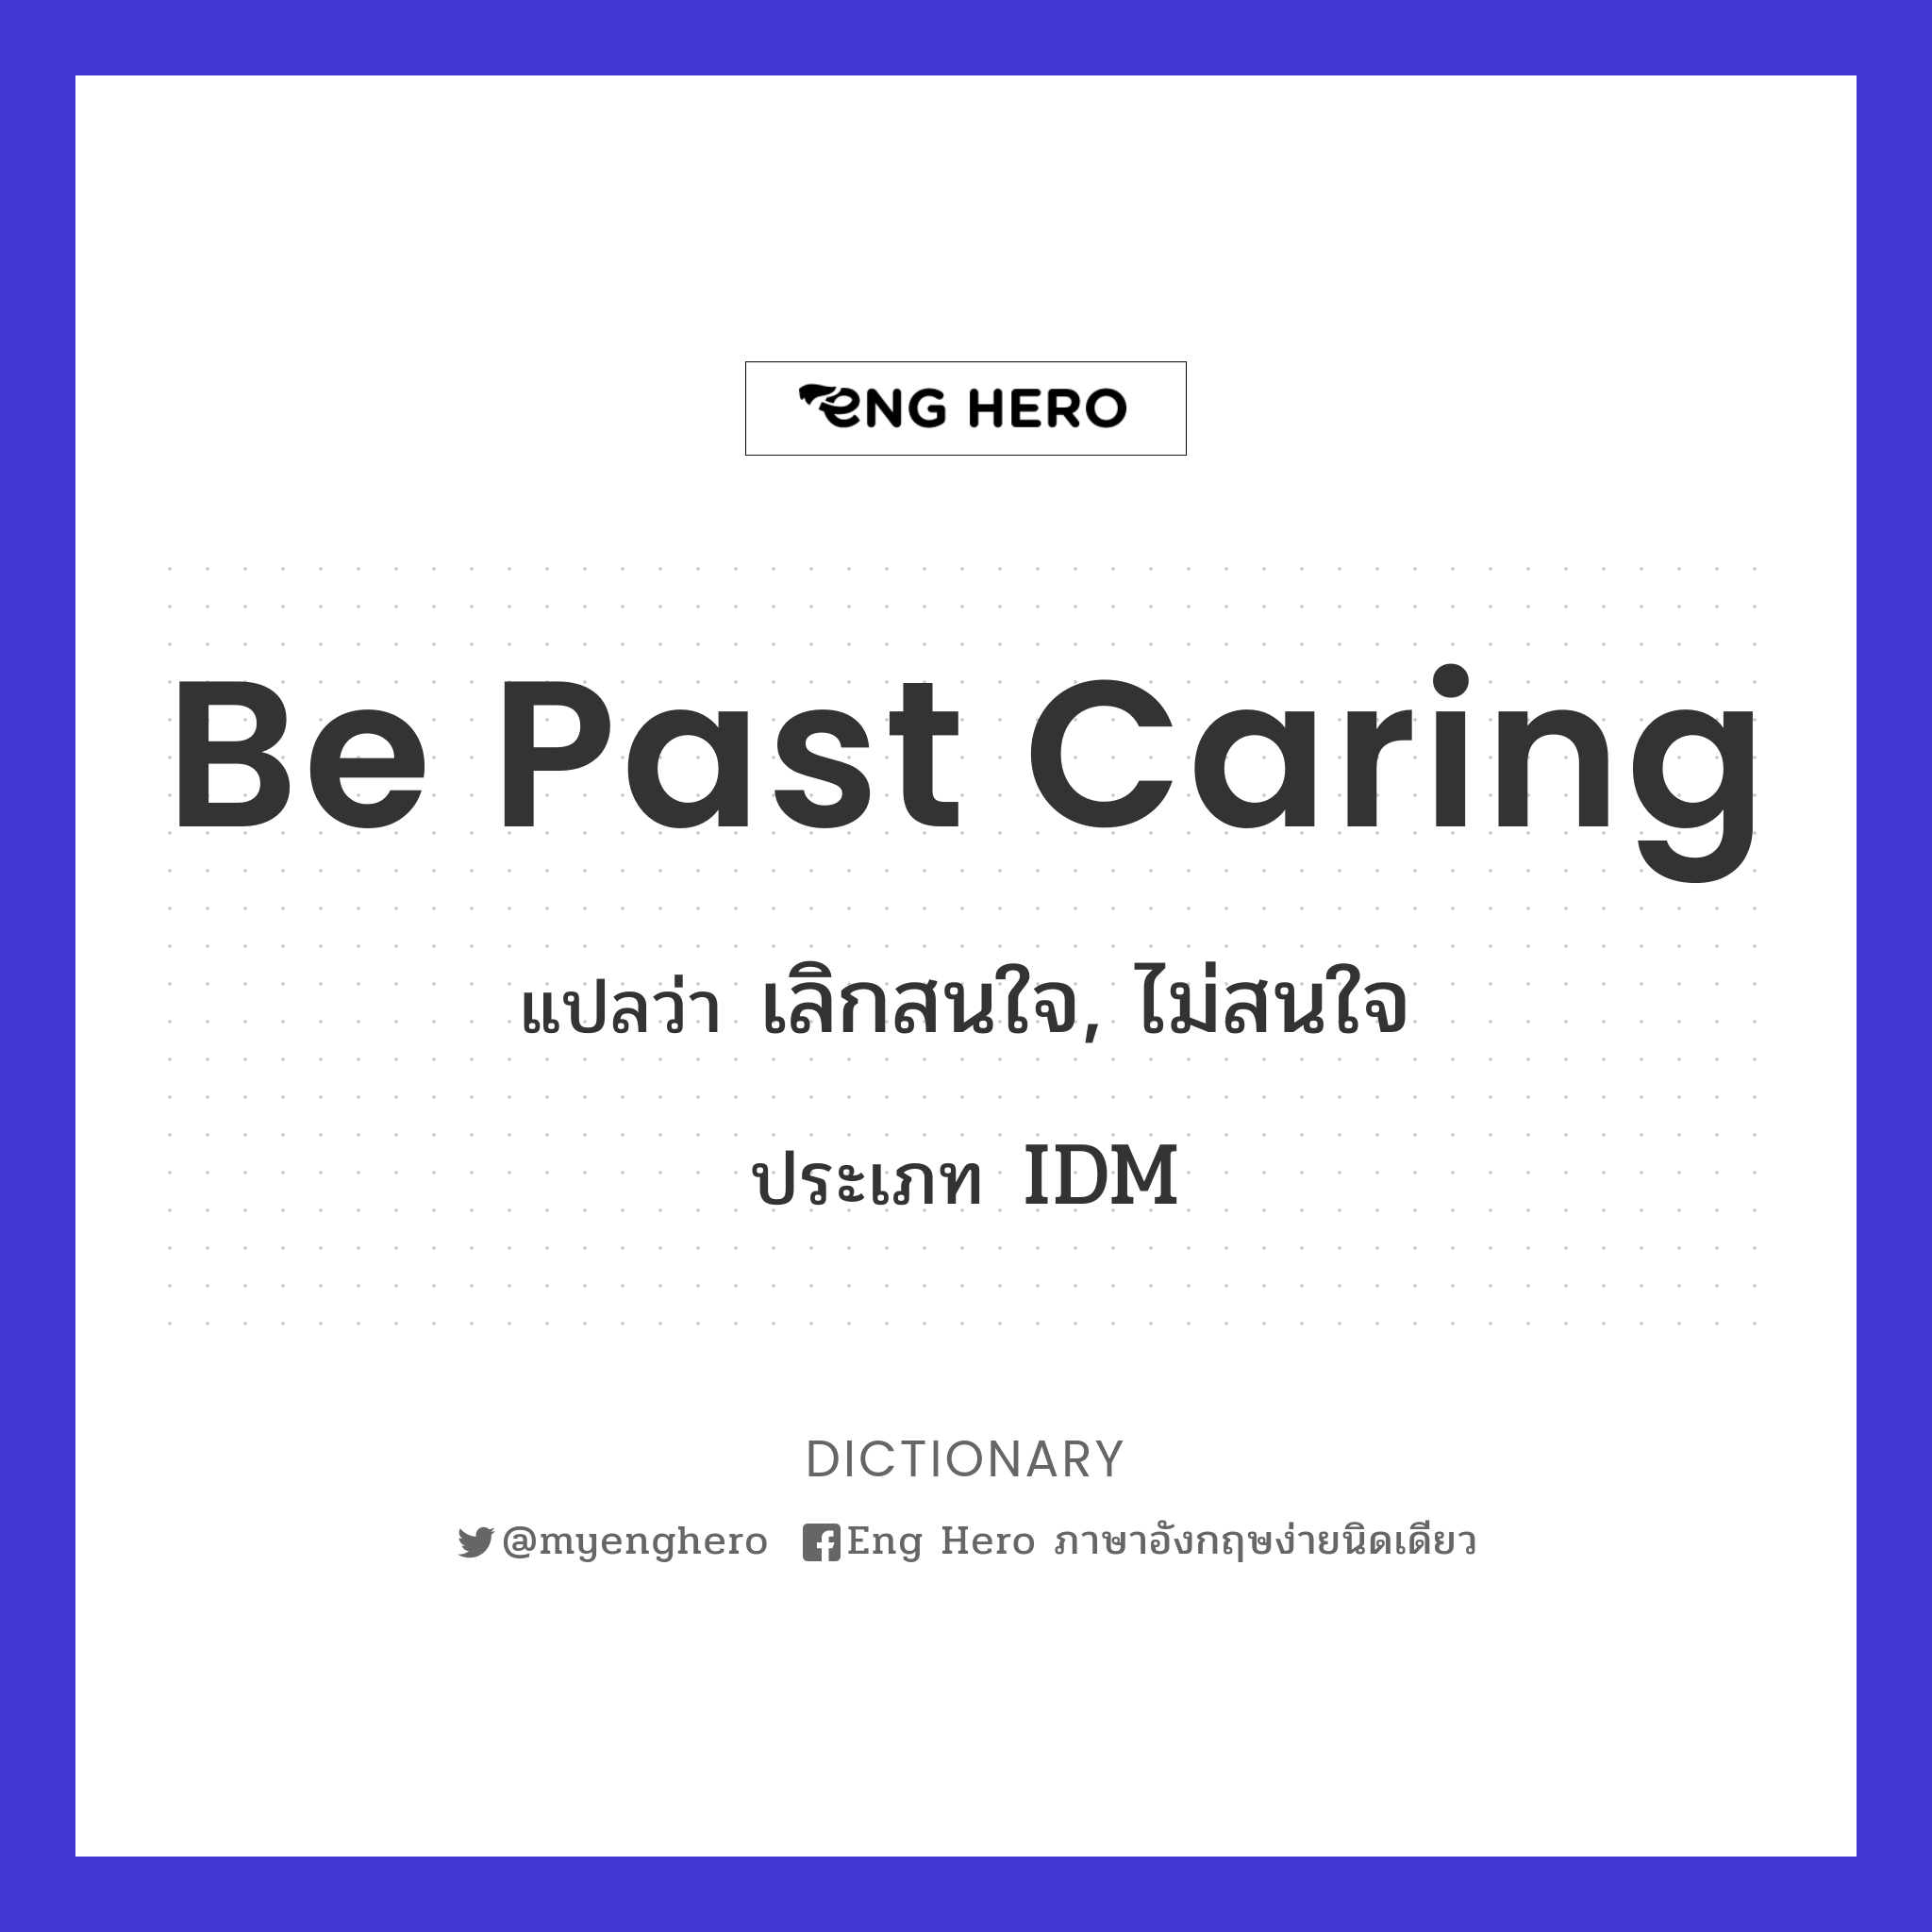 be past caring